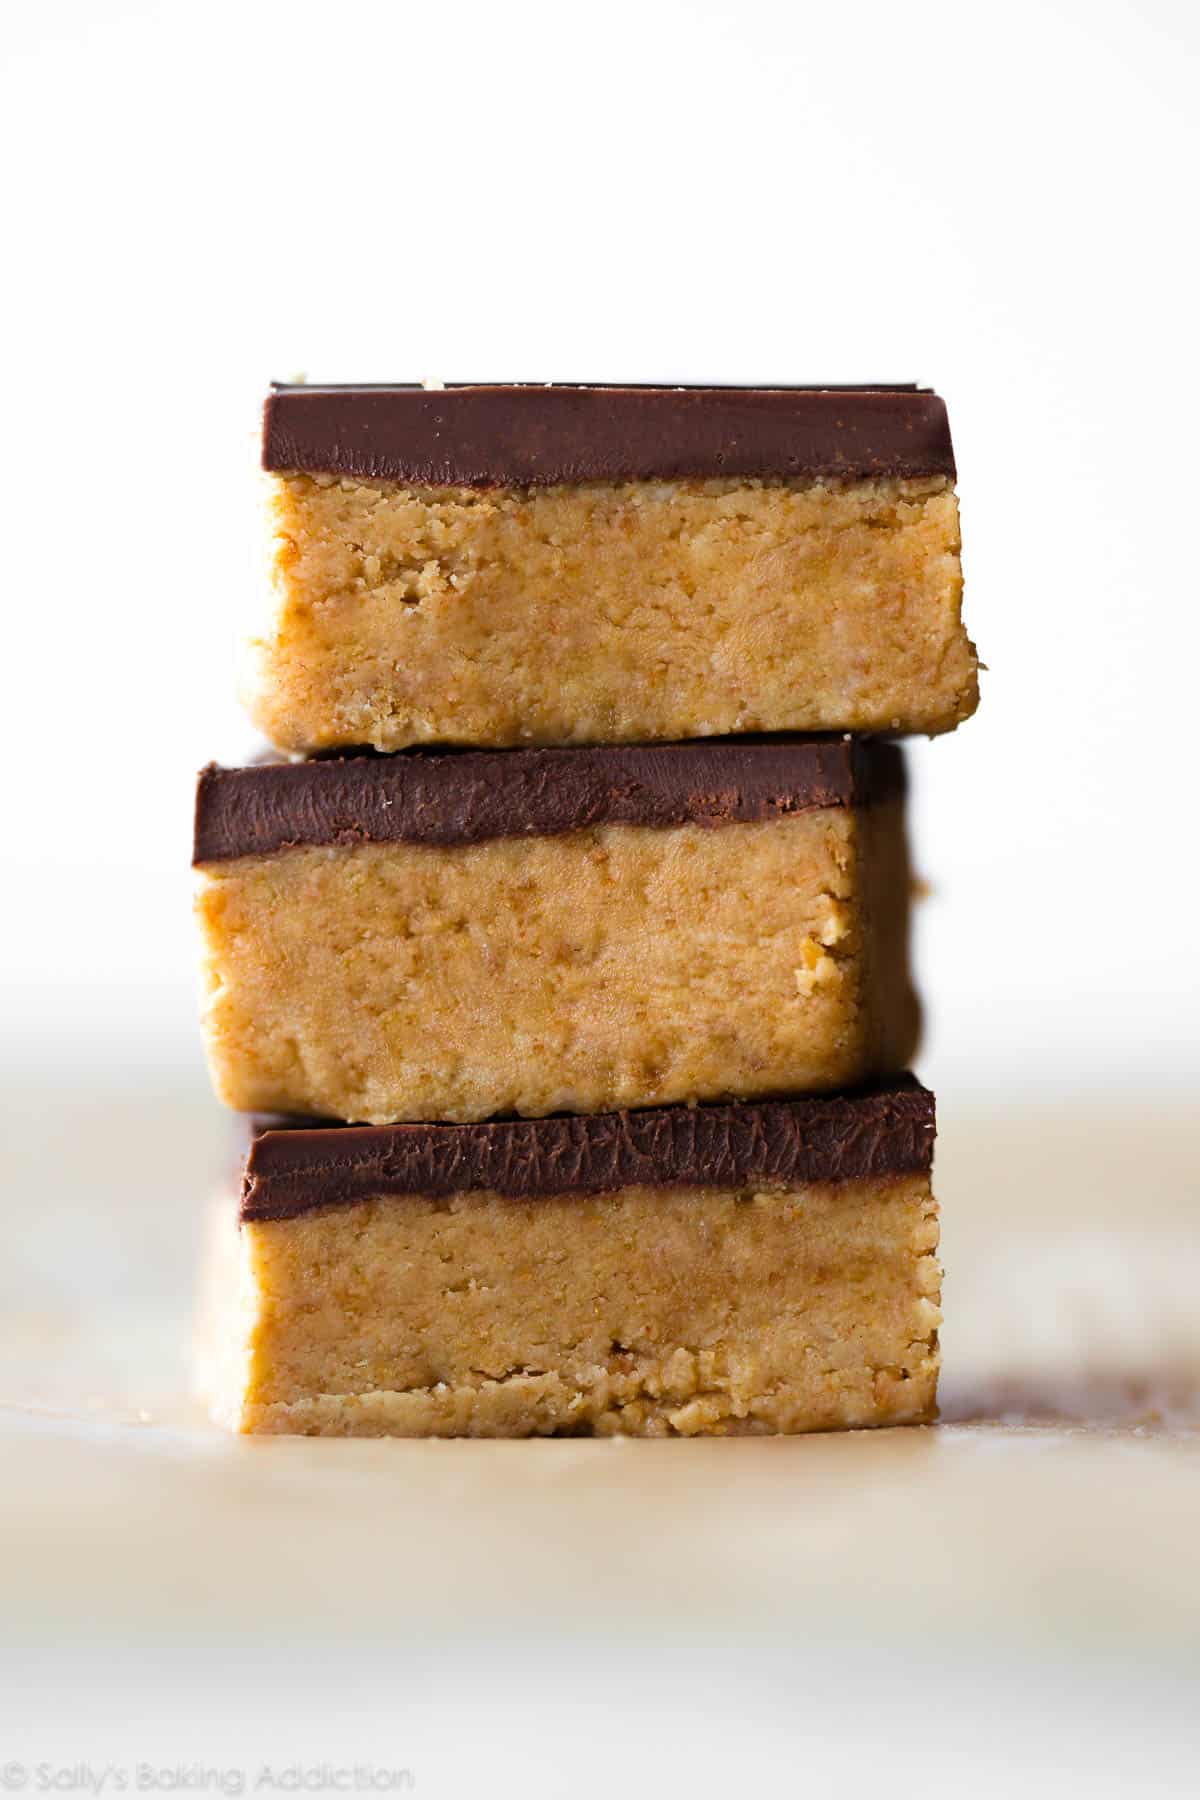 A stack of unbaked chocolate peanut butter bars